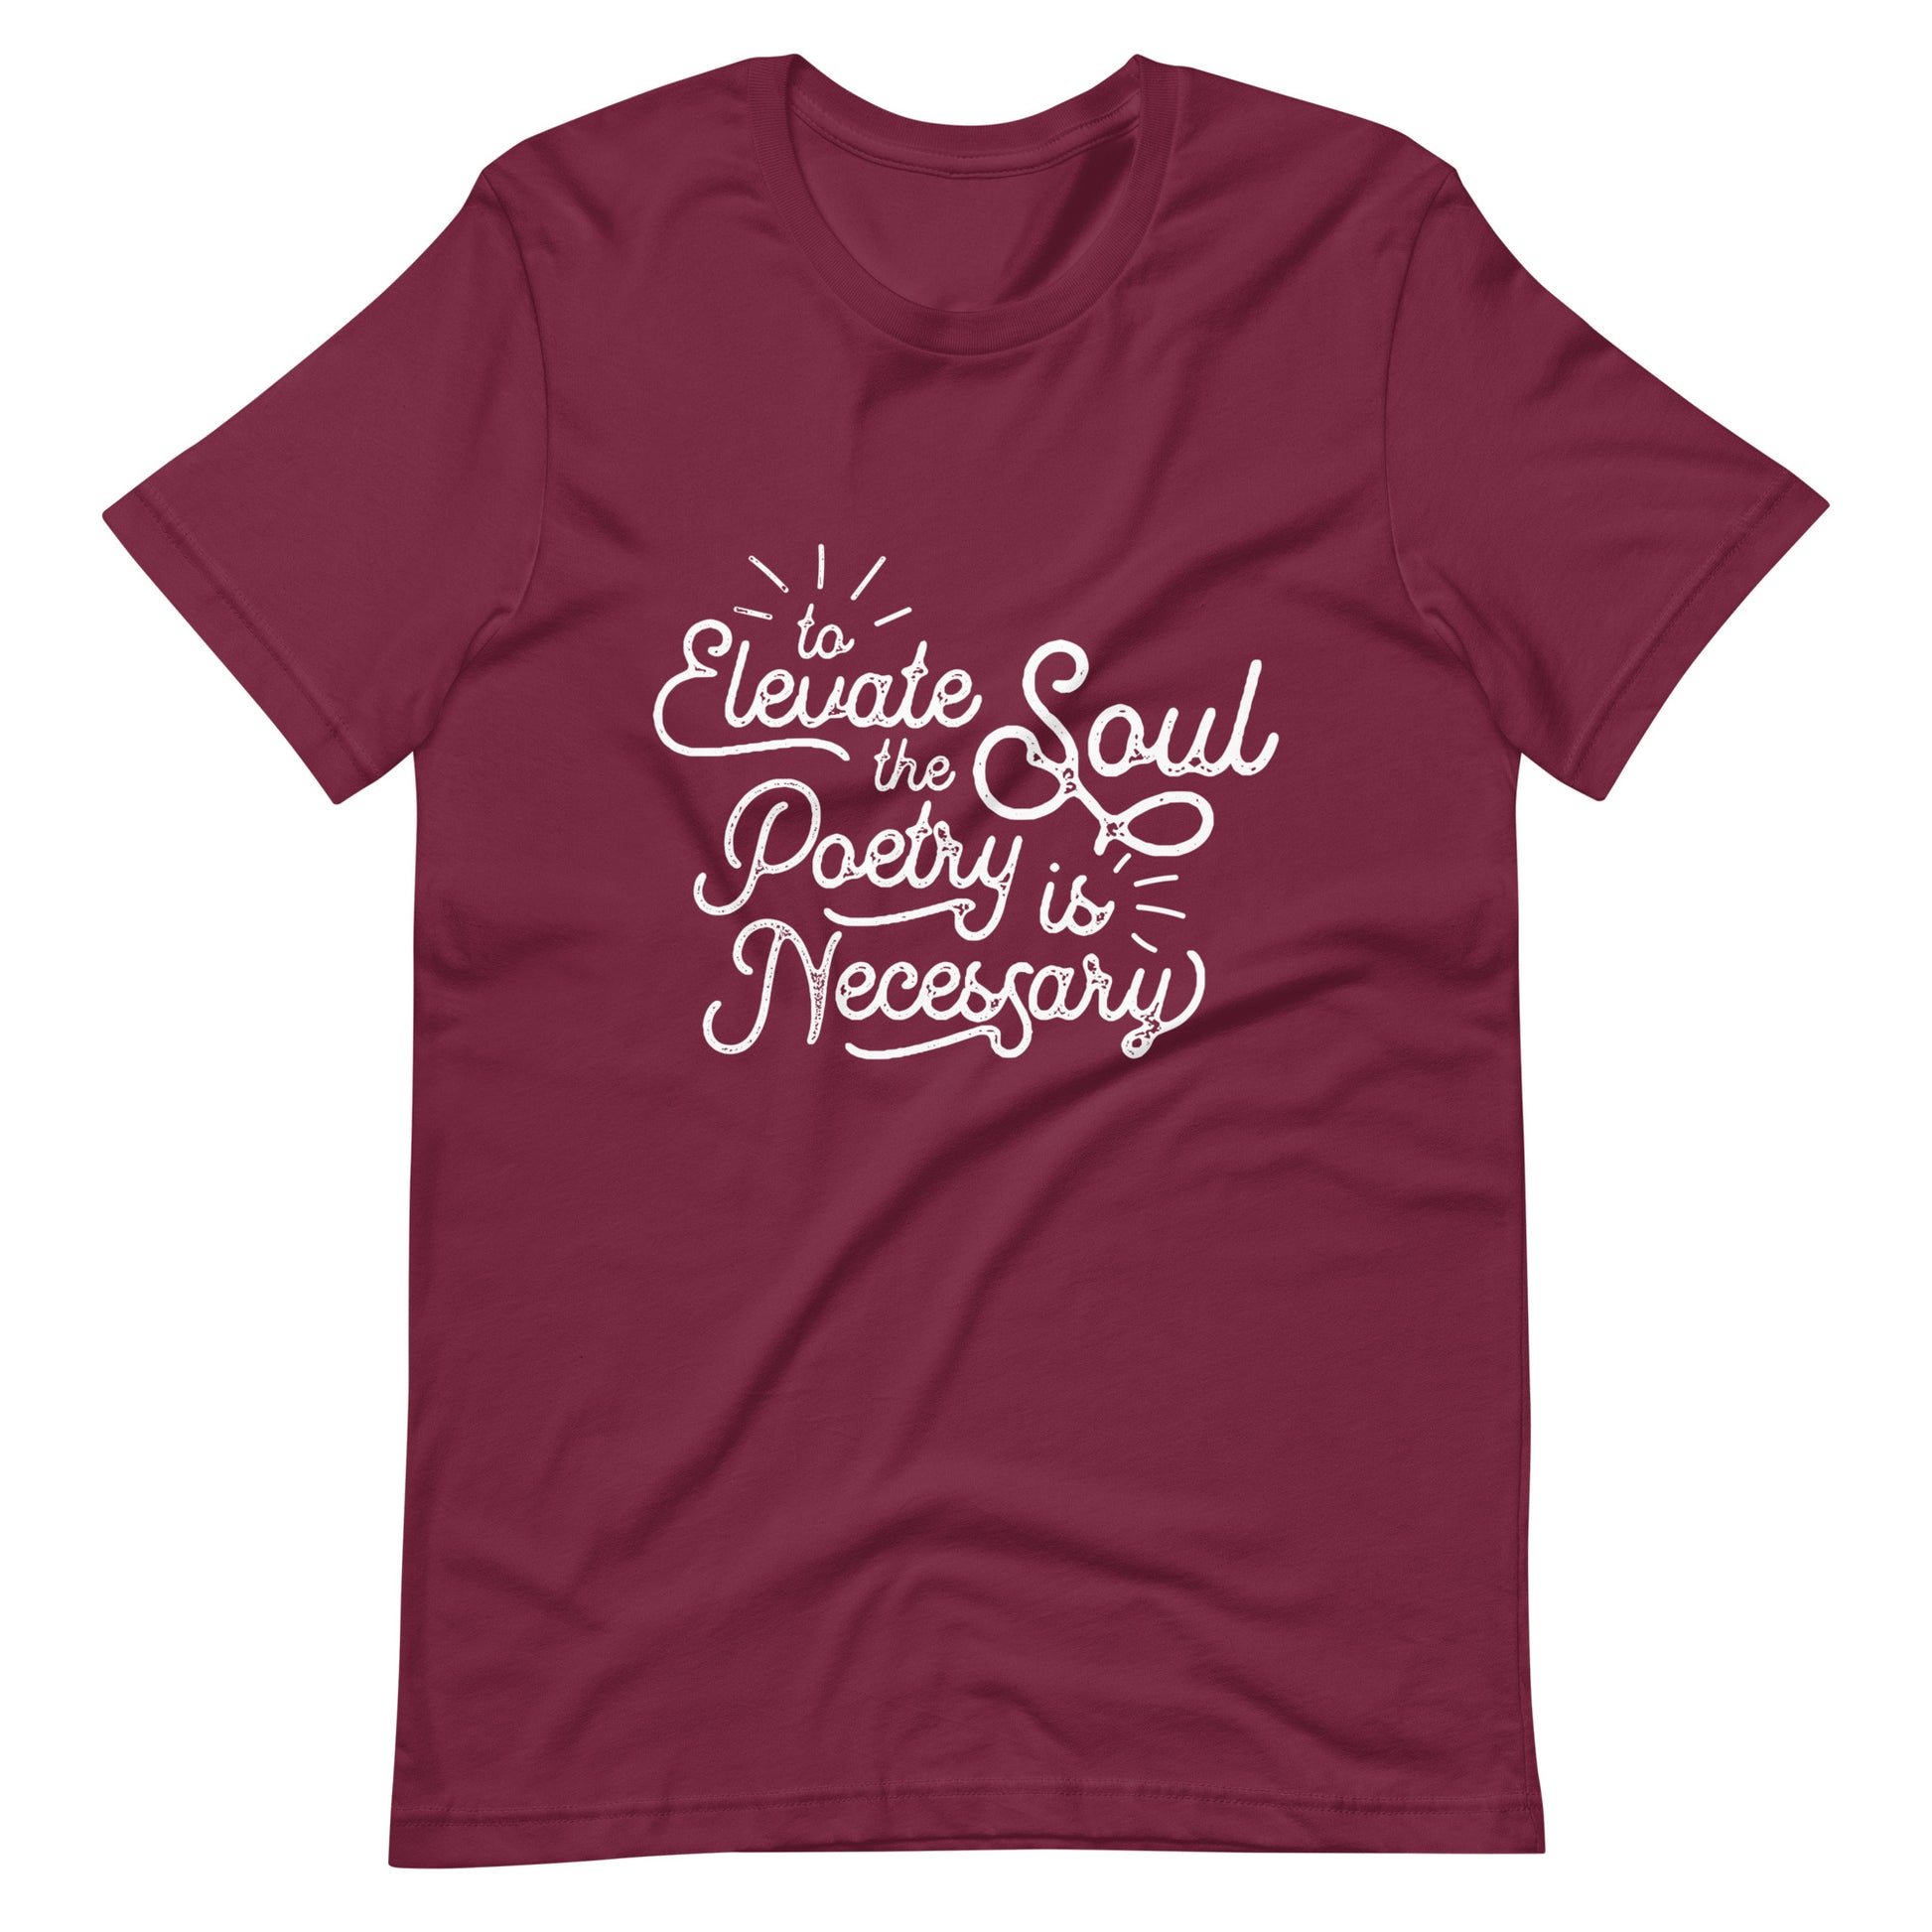 To Elevate the Soul Edgar Allan Poe Quote - Men's t-shirt - Maroon Front